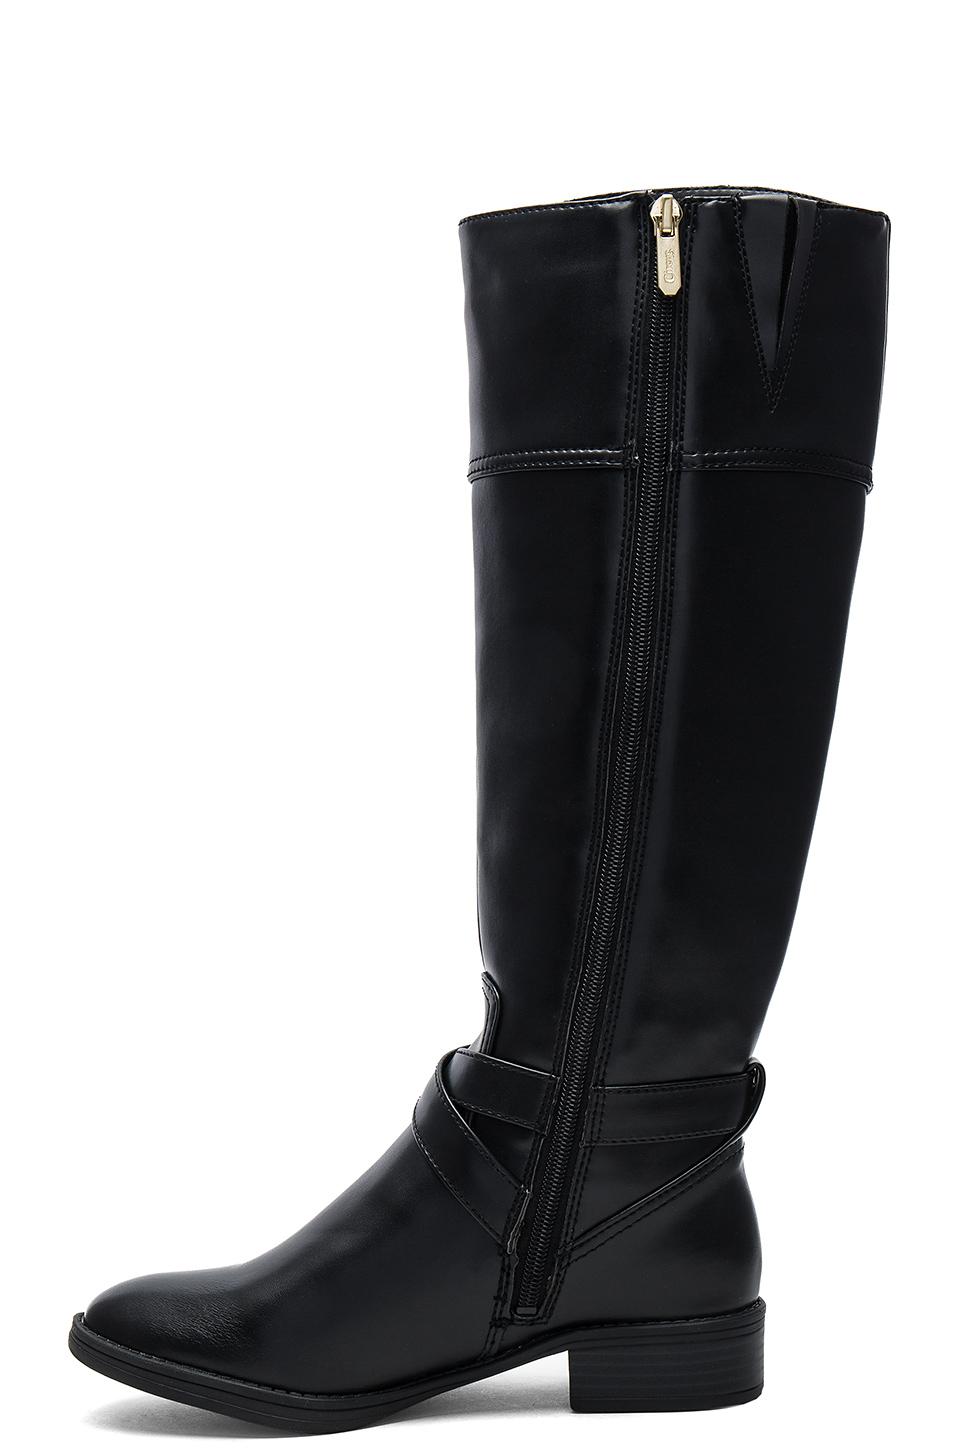 Circus by sam edelman Parker Boot in Black | Lyst